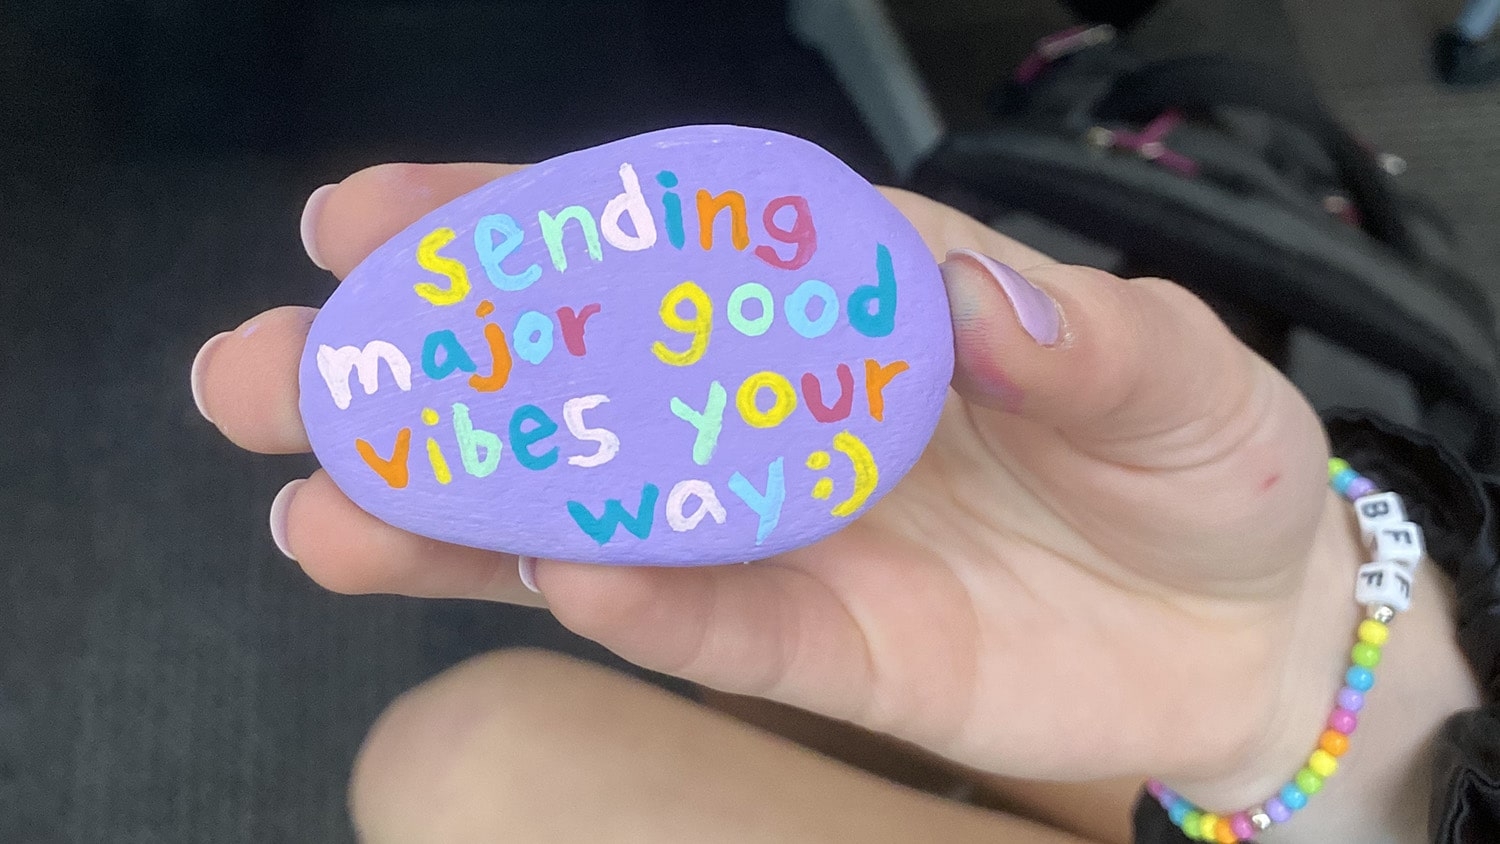 A student holds a painted purple rock with the message "sending major good vibes your way :)" on it. Each letter is in a different color. This photo is a close-up of the rock and the student's hand.